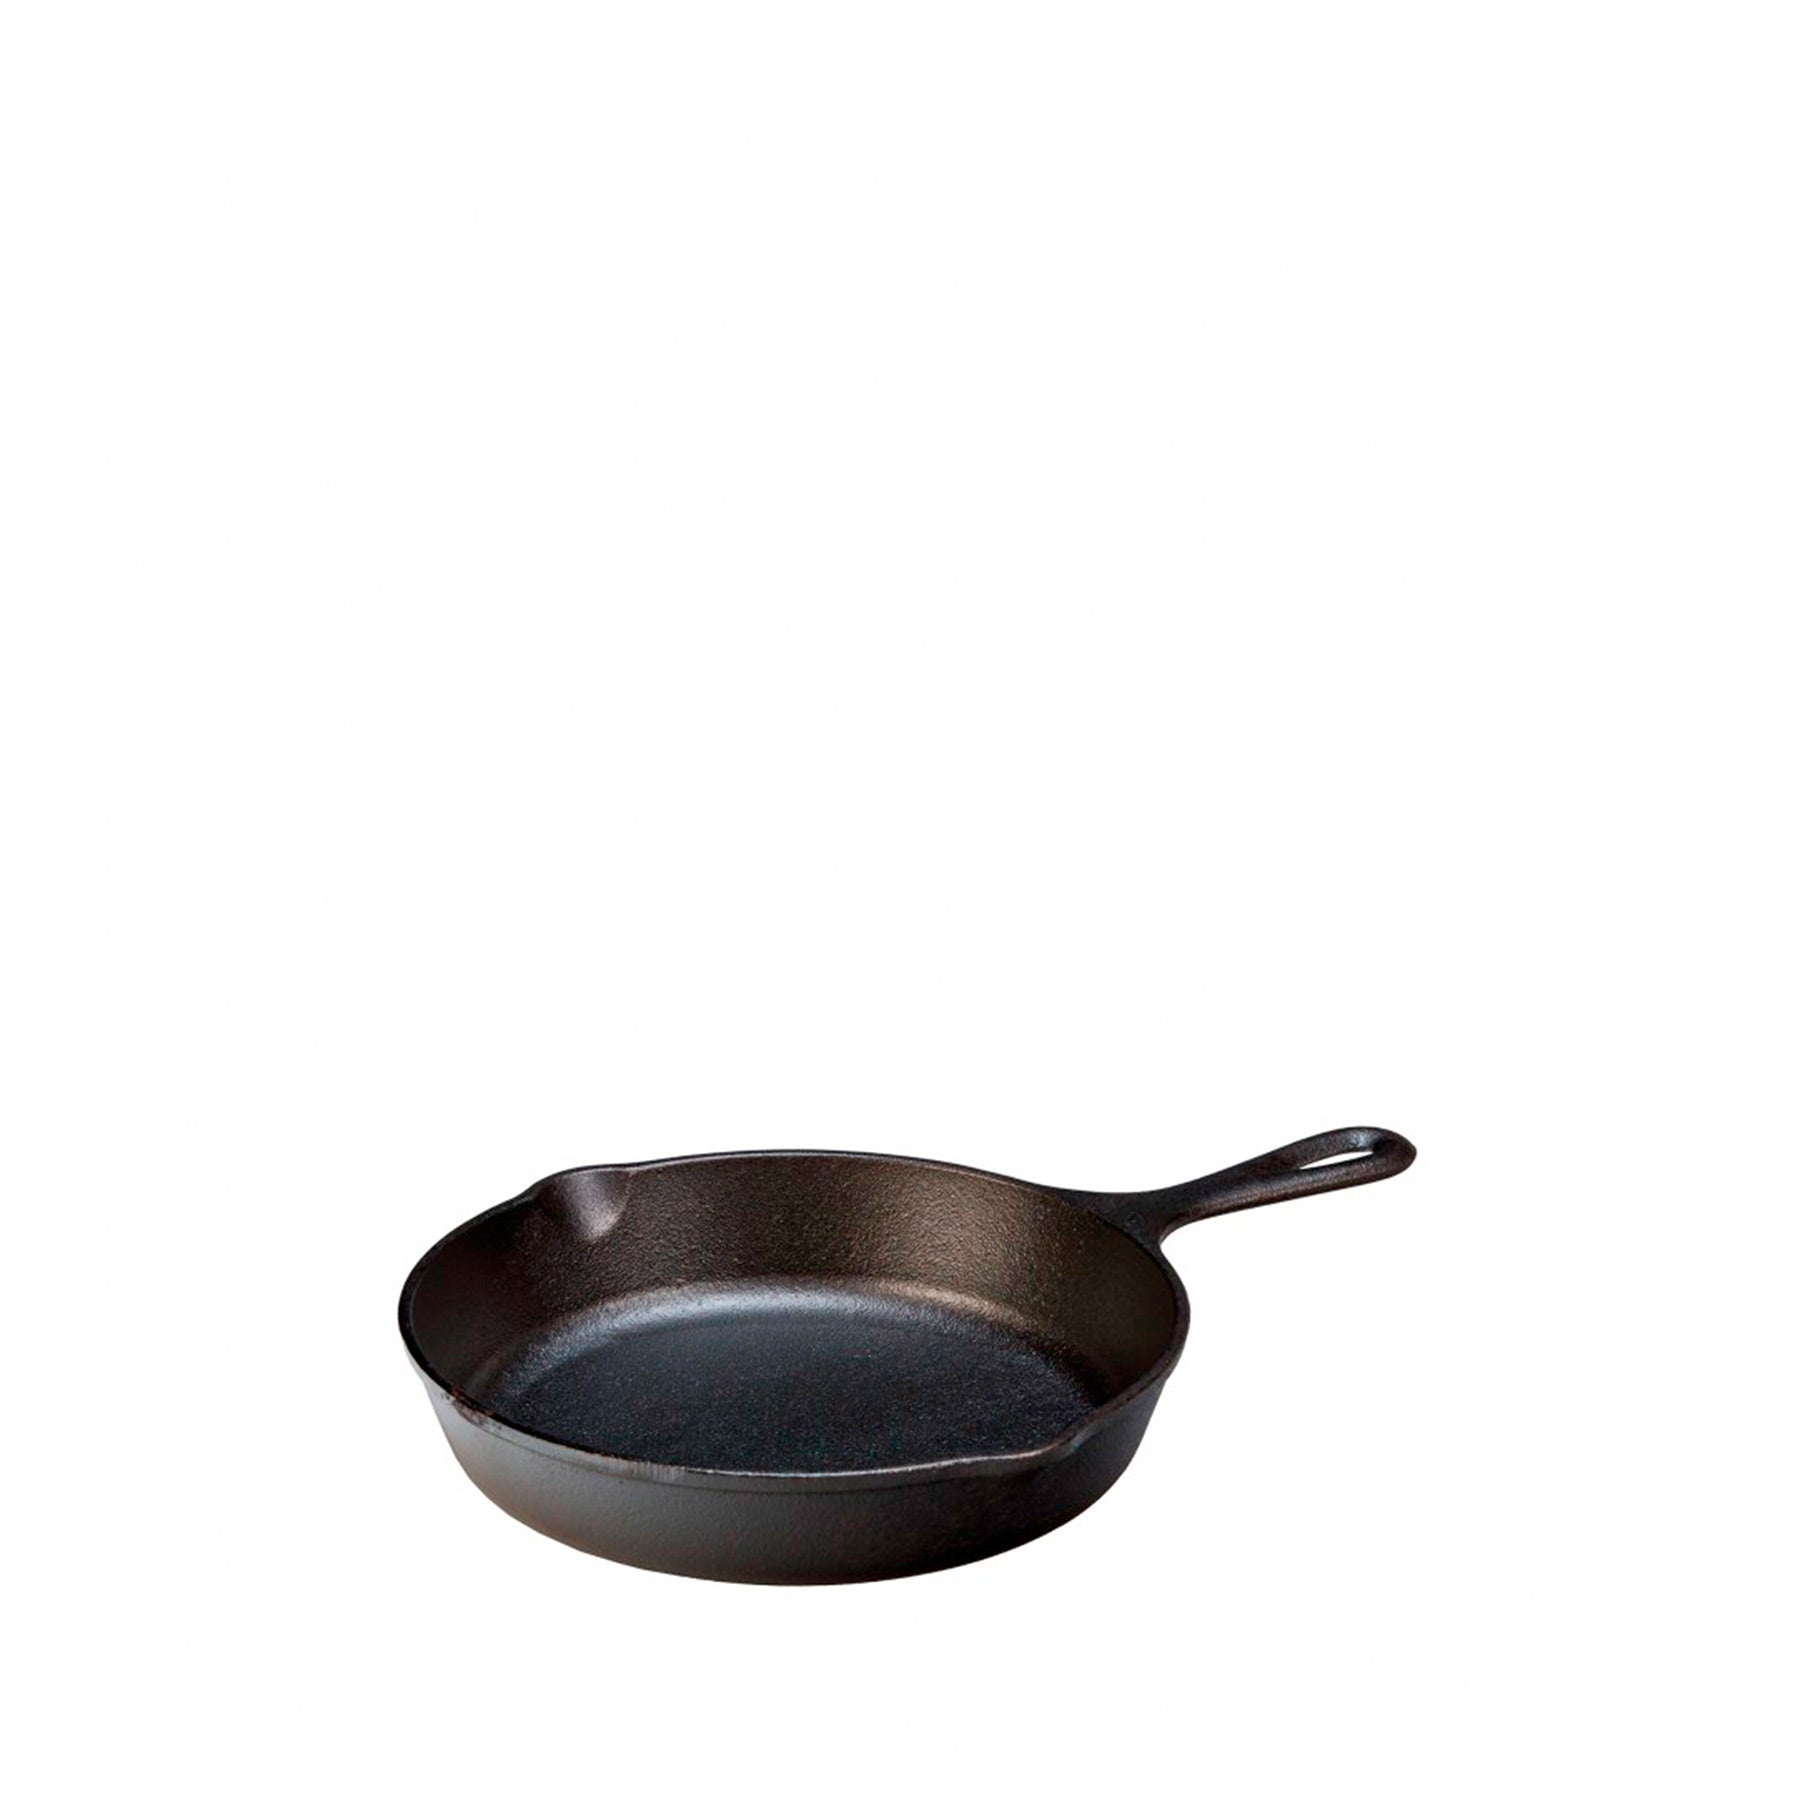 The Brand: Lodge Cast Iron manufactures heirloom-quality cookware